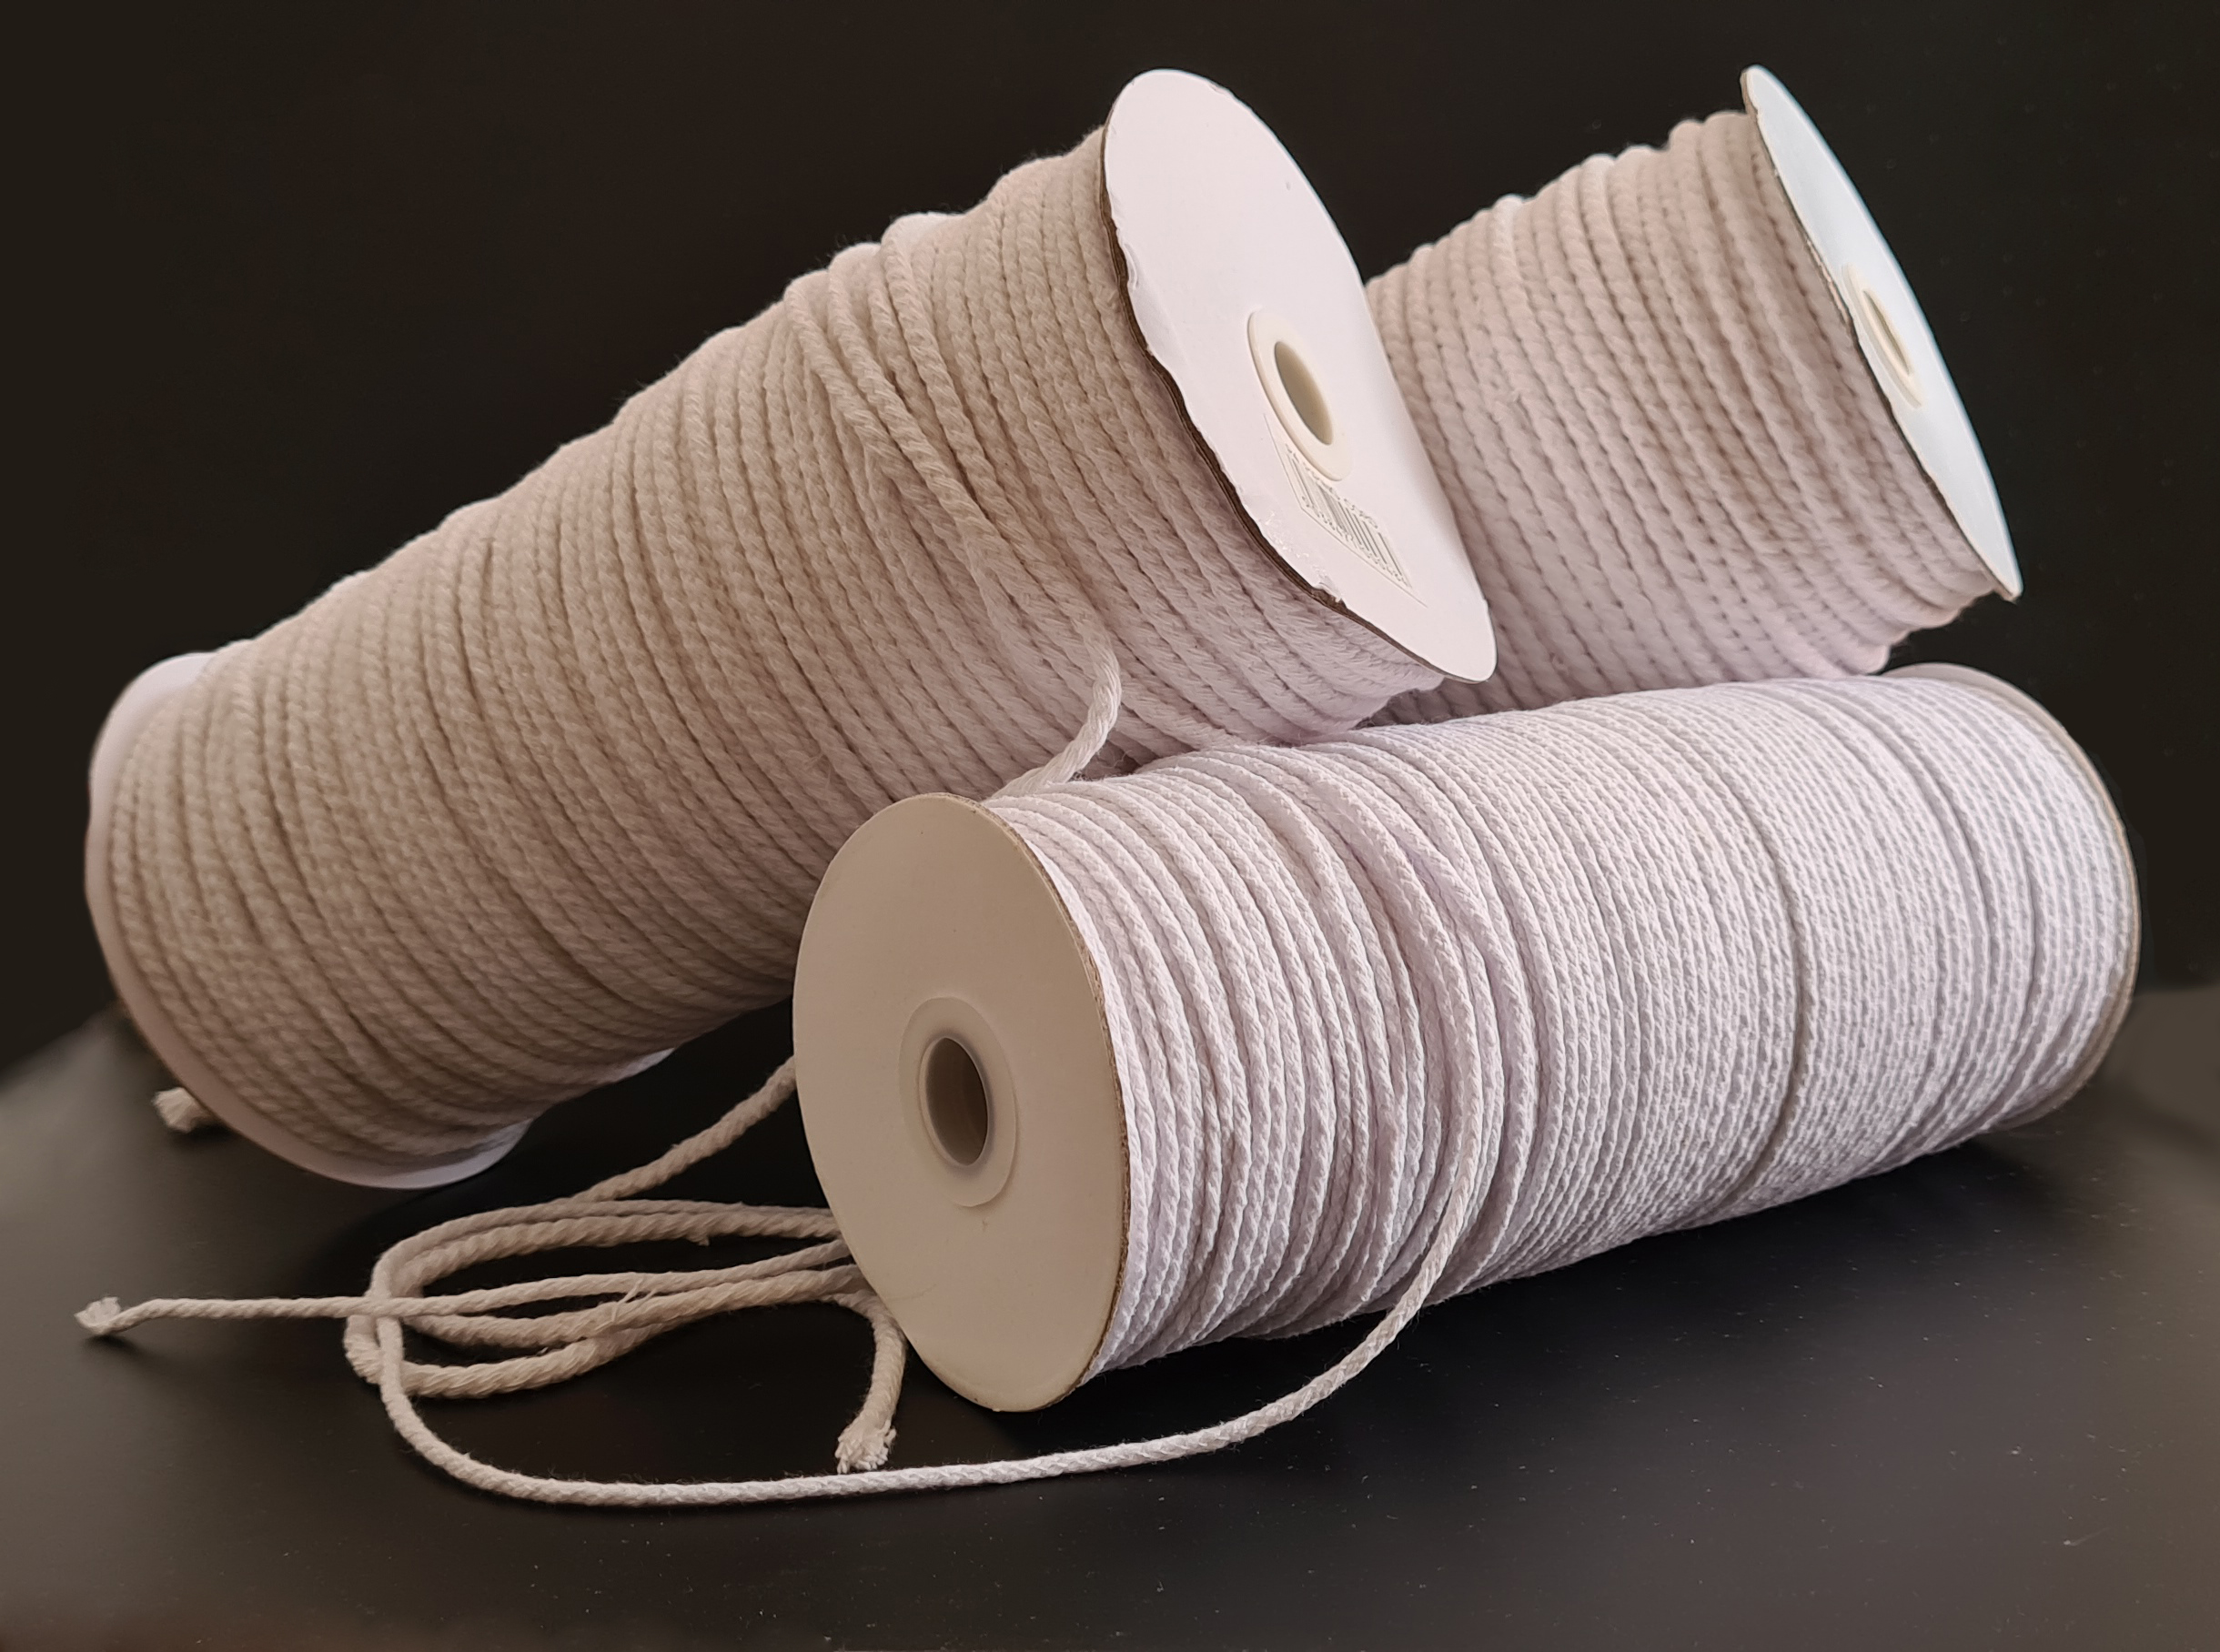 Cotton Piping Cord